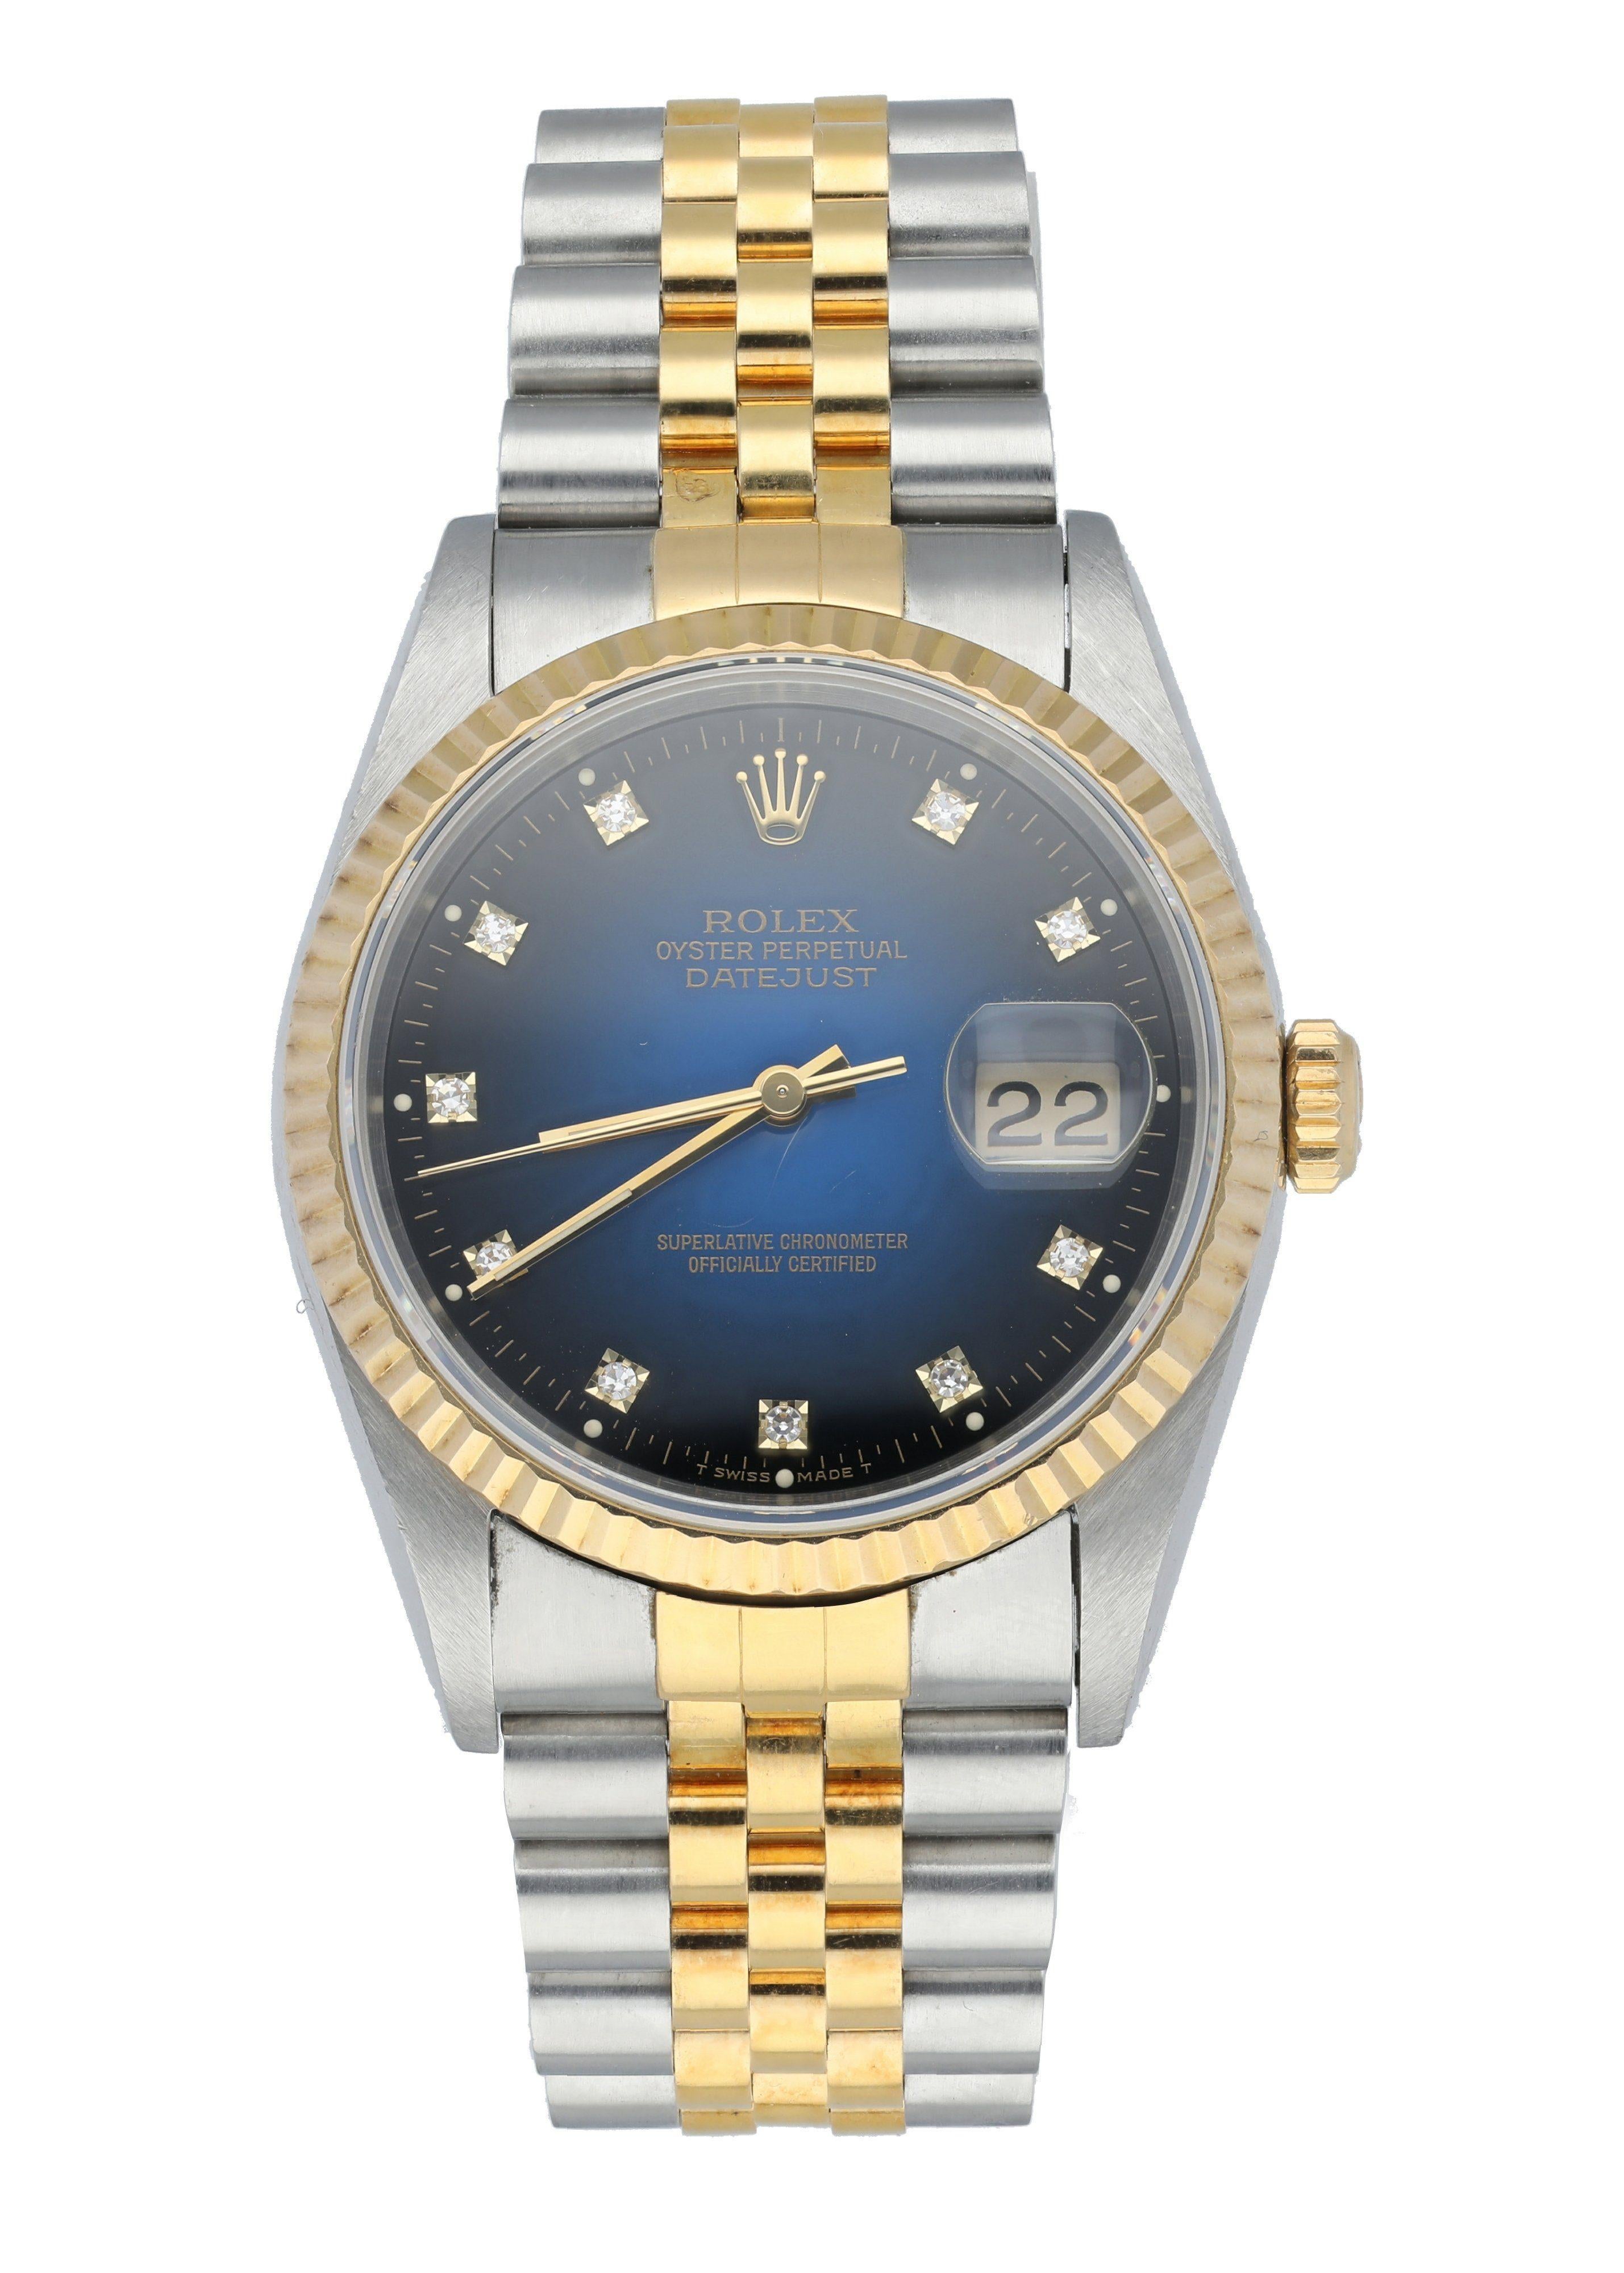 Rolex Datejust 16233 Men's Watch. 
36mm Stainless Steel case. 
Yellow Gold fluted bezel. 
Blue vignette dial with gold hands and factory set diamond hour markers. 
Minute markers on the outer dial. 
Date display at the 3 o'clock position. 
Two-Tone